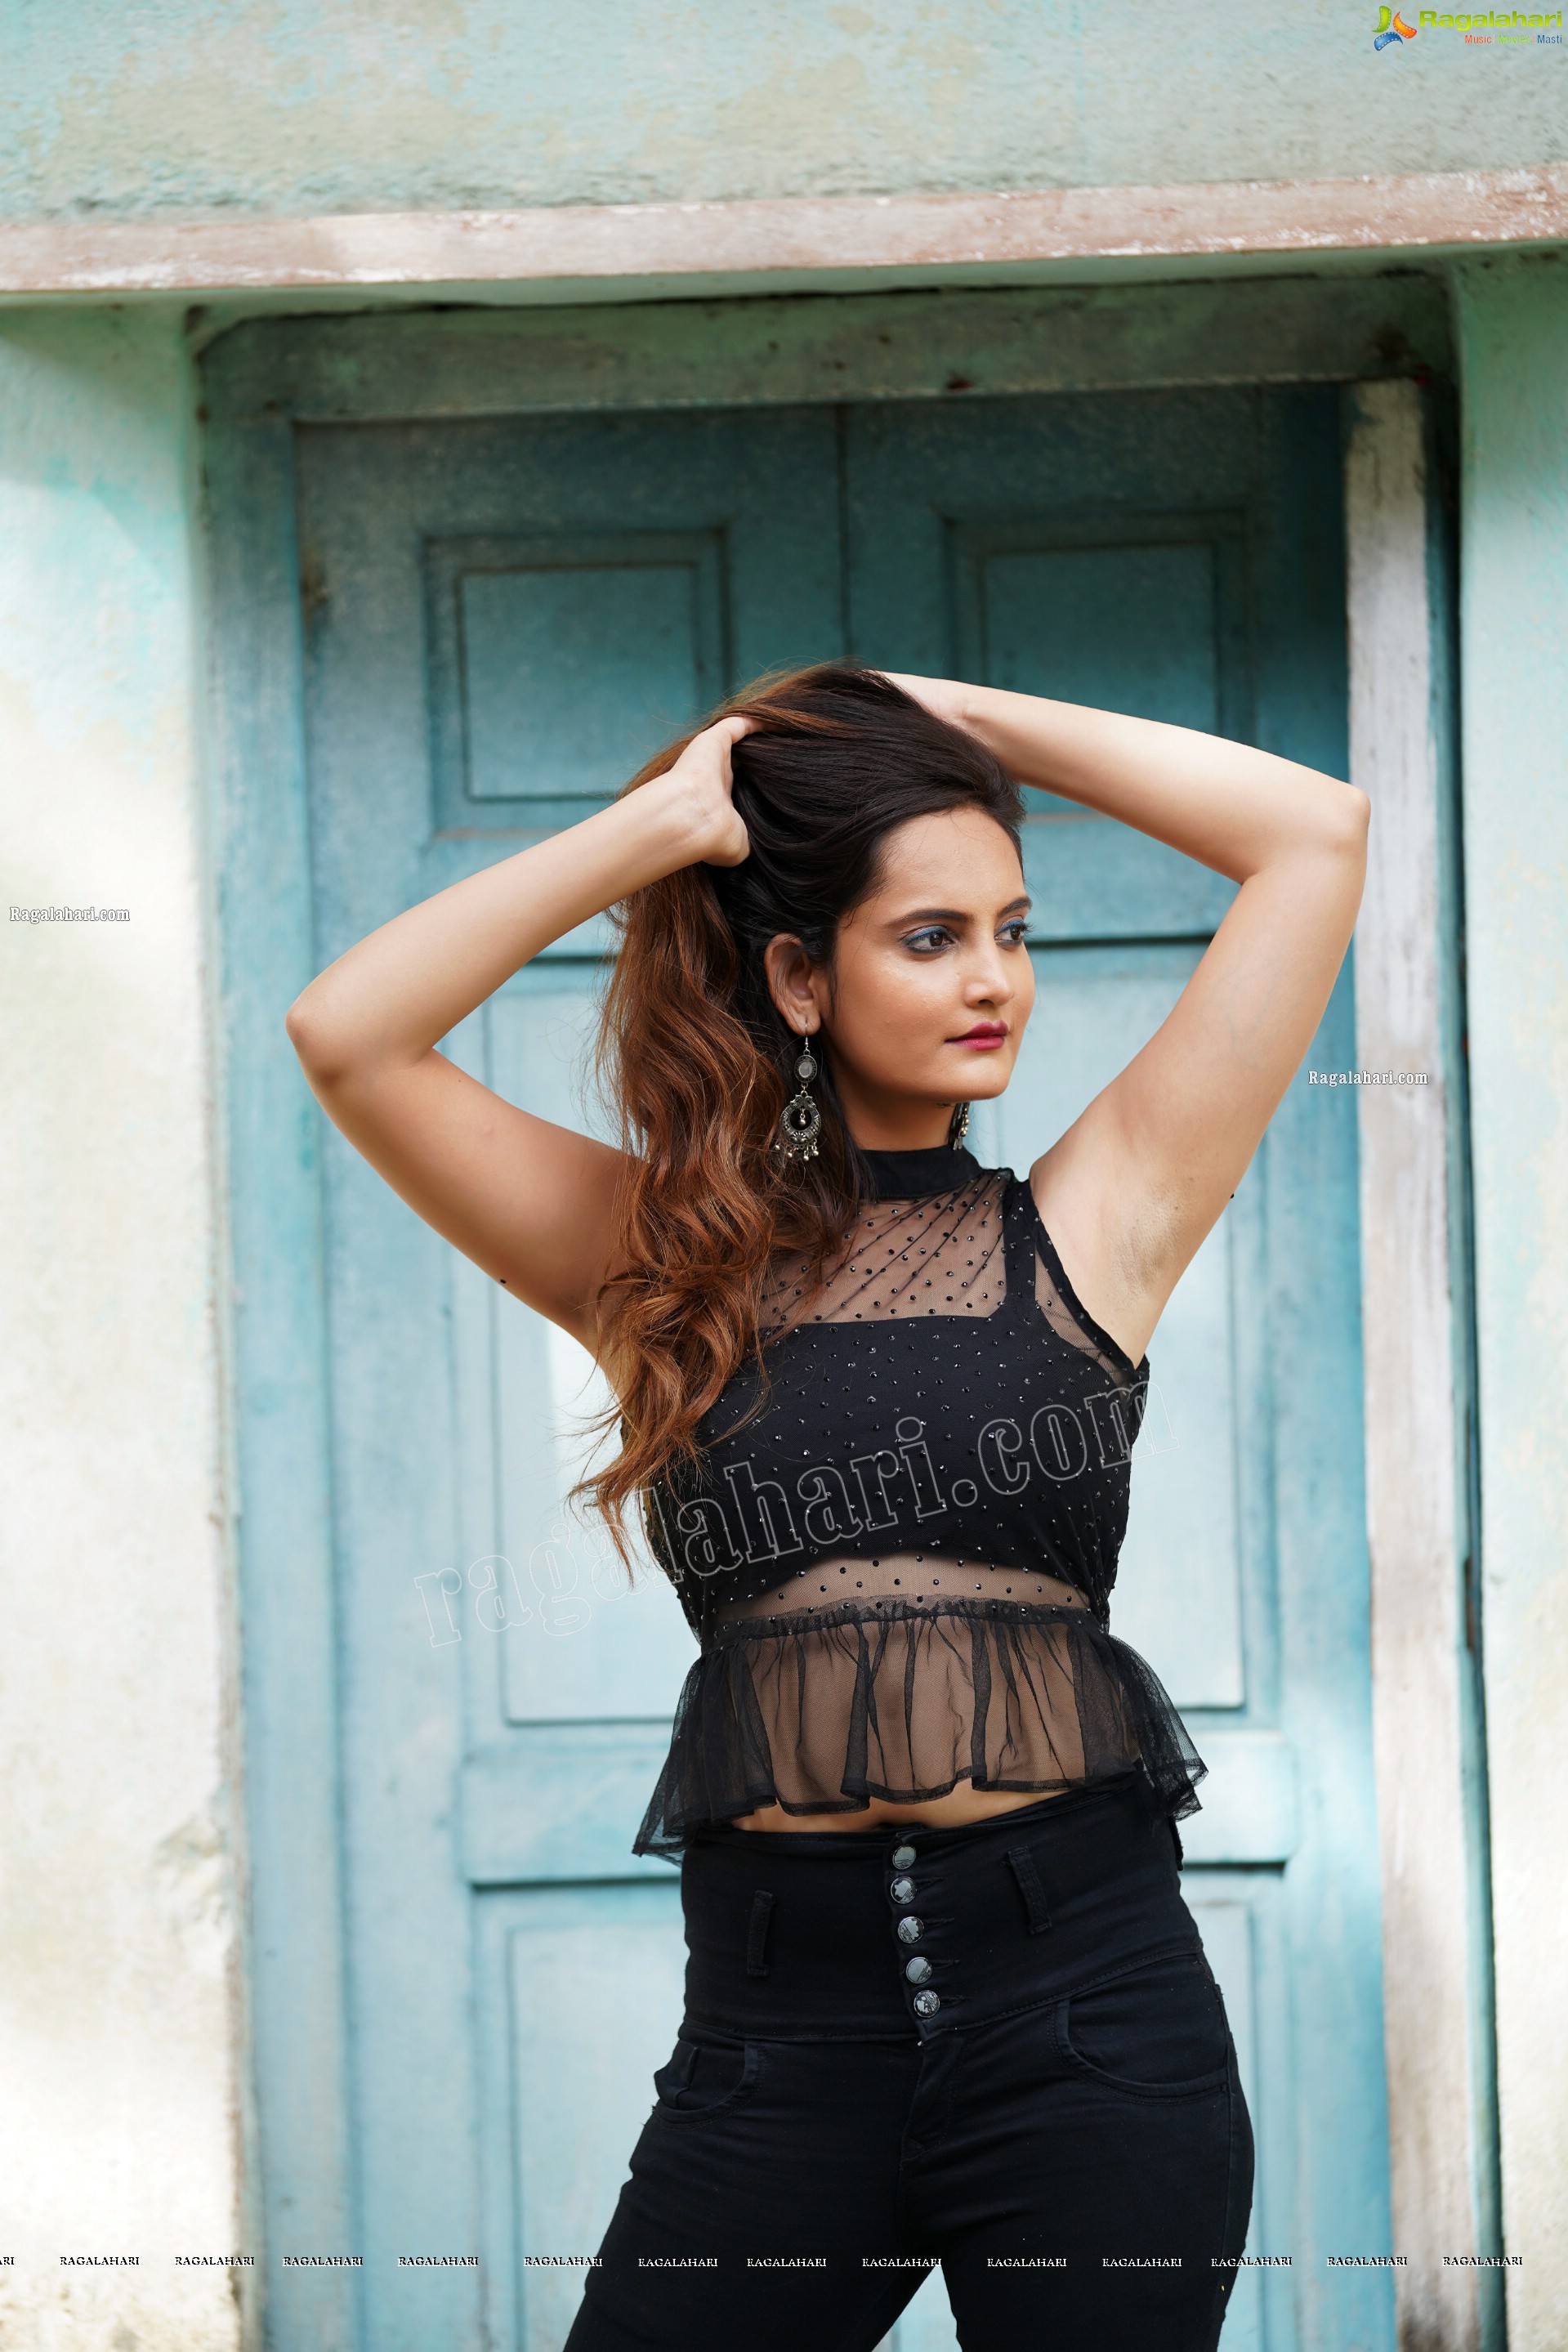 Dhriti Patel in All Black Outfit, Exclusive Photoshoot